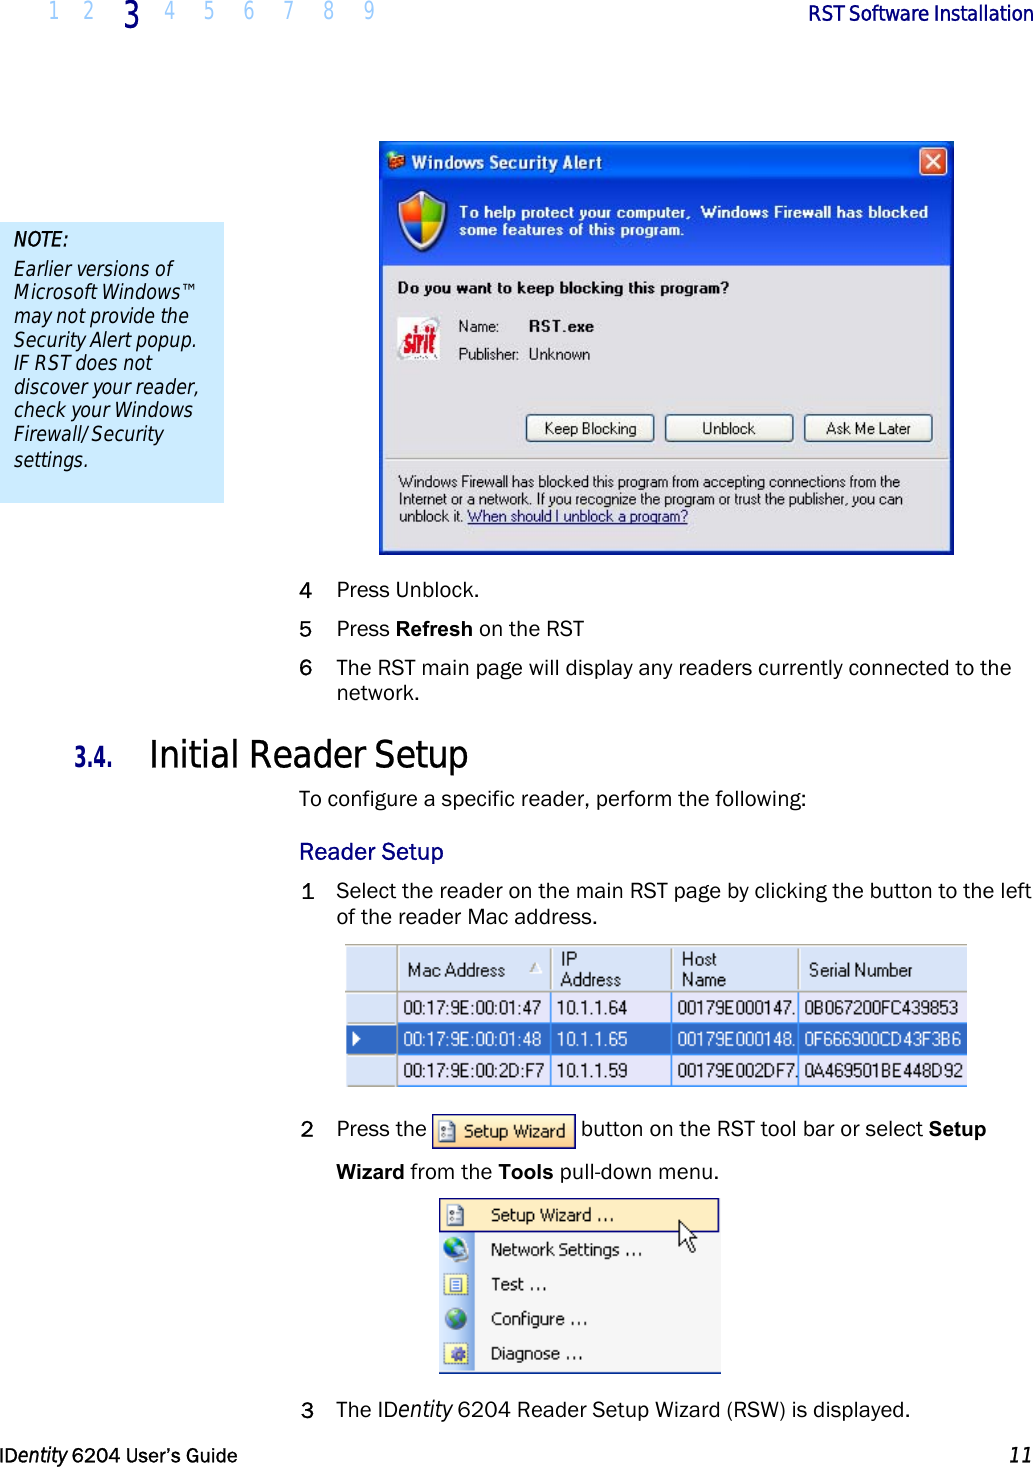  1 2 3  4 5 6 7 8 9        RST Software Installation   IDentity 6204 User’s Guide  11   4 Press Unblock. 5 Press Refresh on the RST 6 The RST main page will display any readers currently connected to the network. 3.4. Initial Reader Setup To configure a specific reader, perform the following: Reader Setup 1 Select the reader on the main RST page by clicking the button to the left of the reader Mac address.  2 Press the  button on the RST tool bar or select Setup Wizard from the Tools pull-down menu.  3 The IDentity 6204 Reader Setup Wizard (RSW) is displayed. NOTE: Earlier versions of Microsoft Windows™ may not provide the Security Alert popup. IF RST does not discover your reader, check your Windows Firewall/Security settings. 